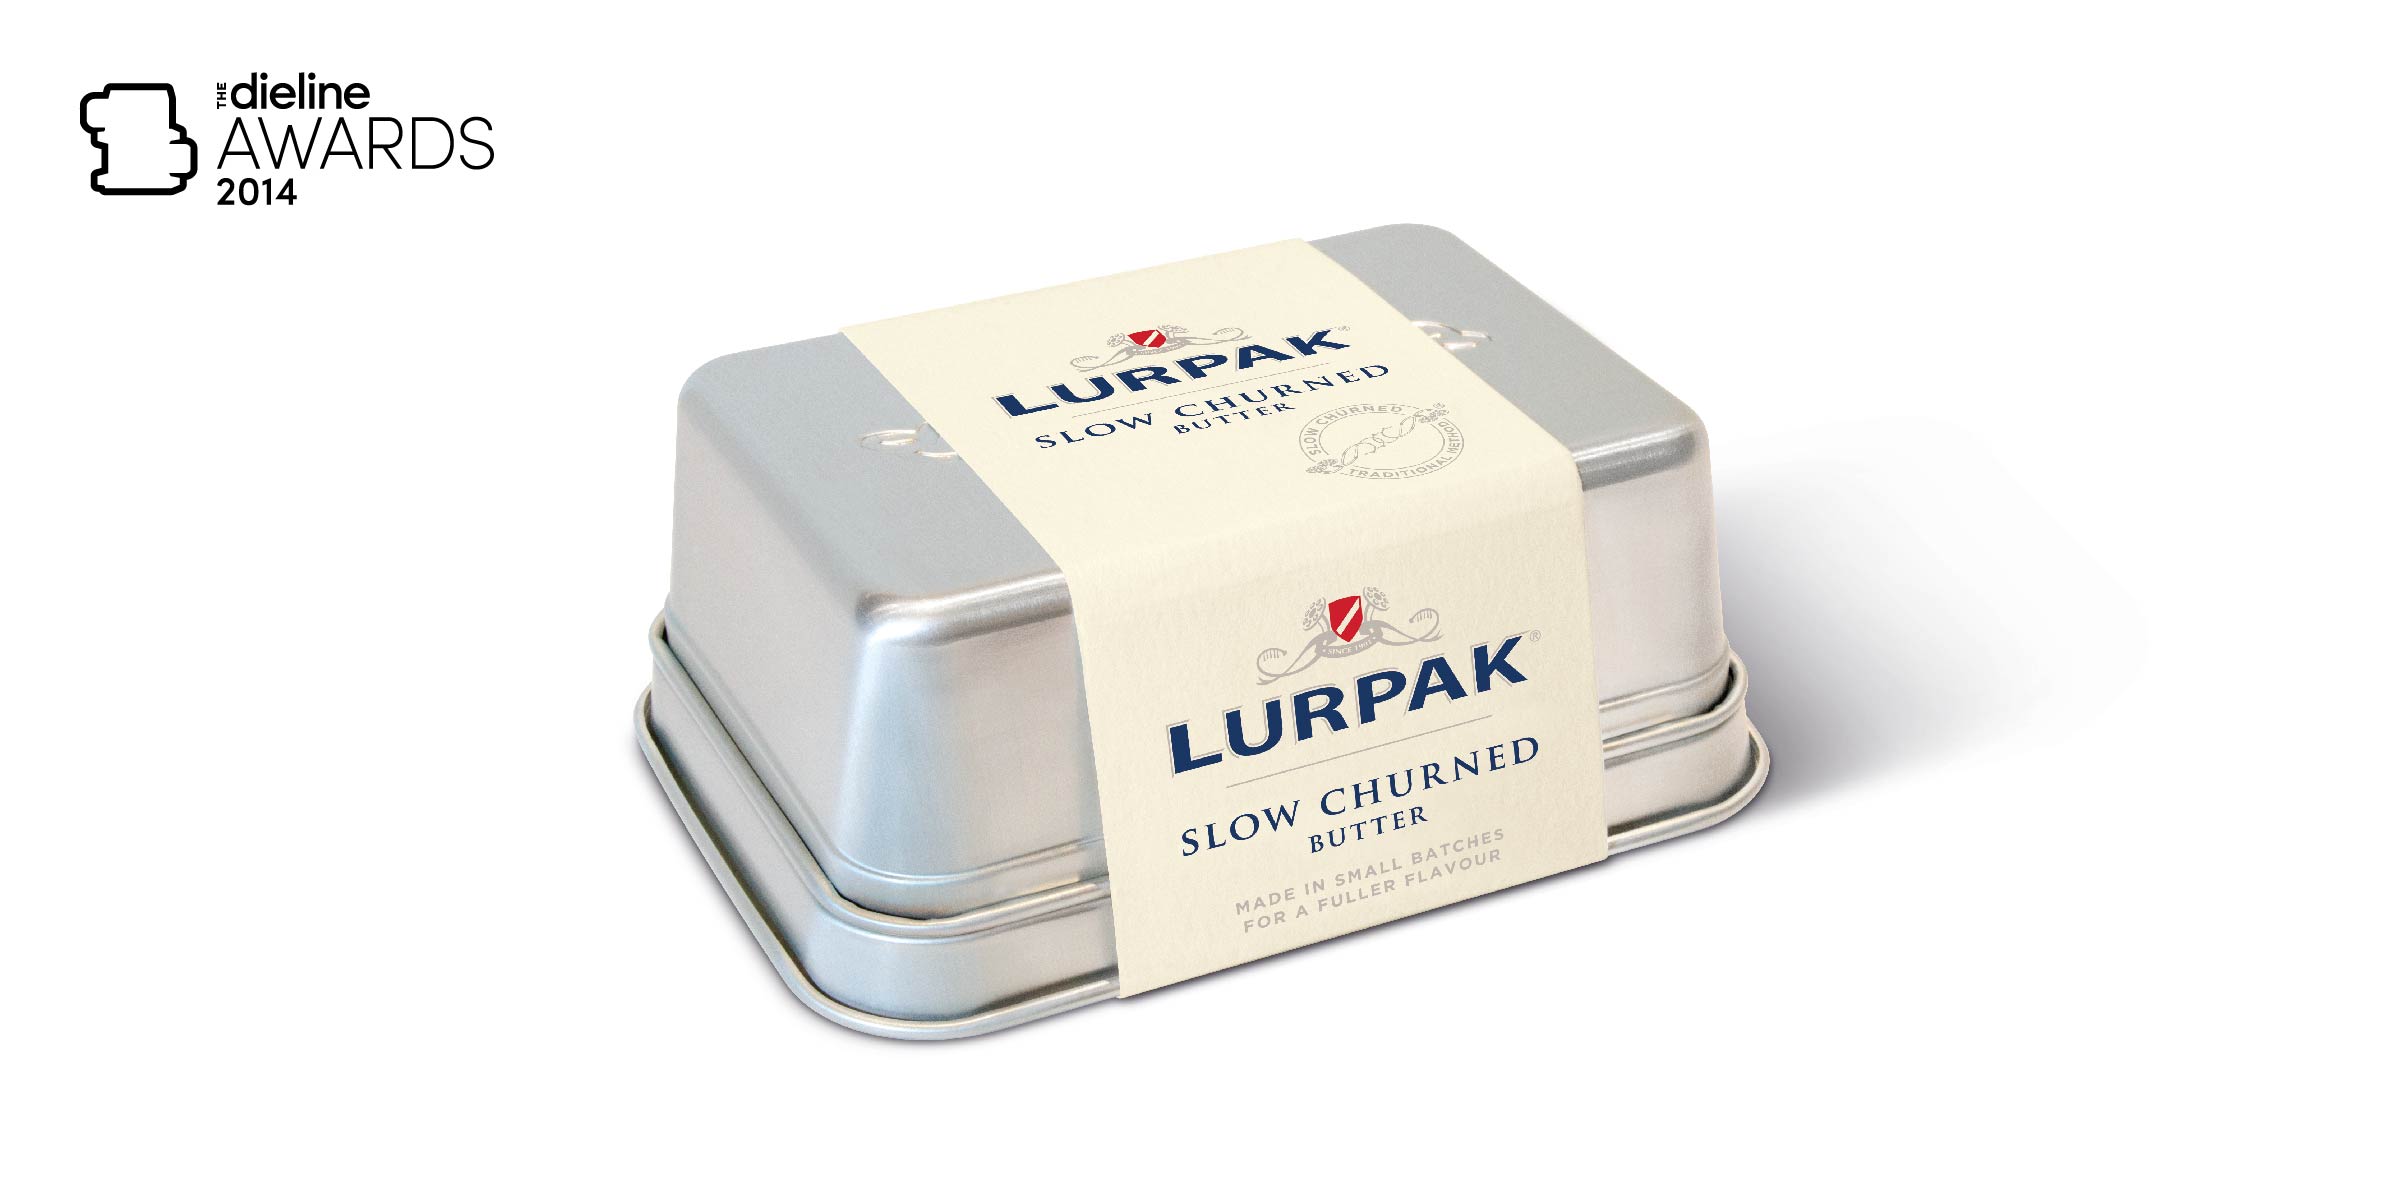 The Dieline Awards 2014: Dairy, Spices, & Oils, 2nd Place – Lurpak Slow Churned